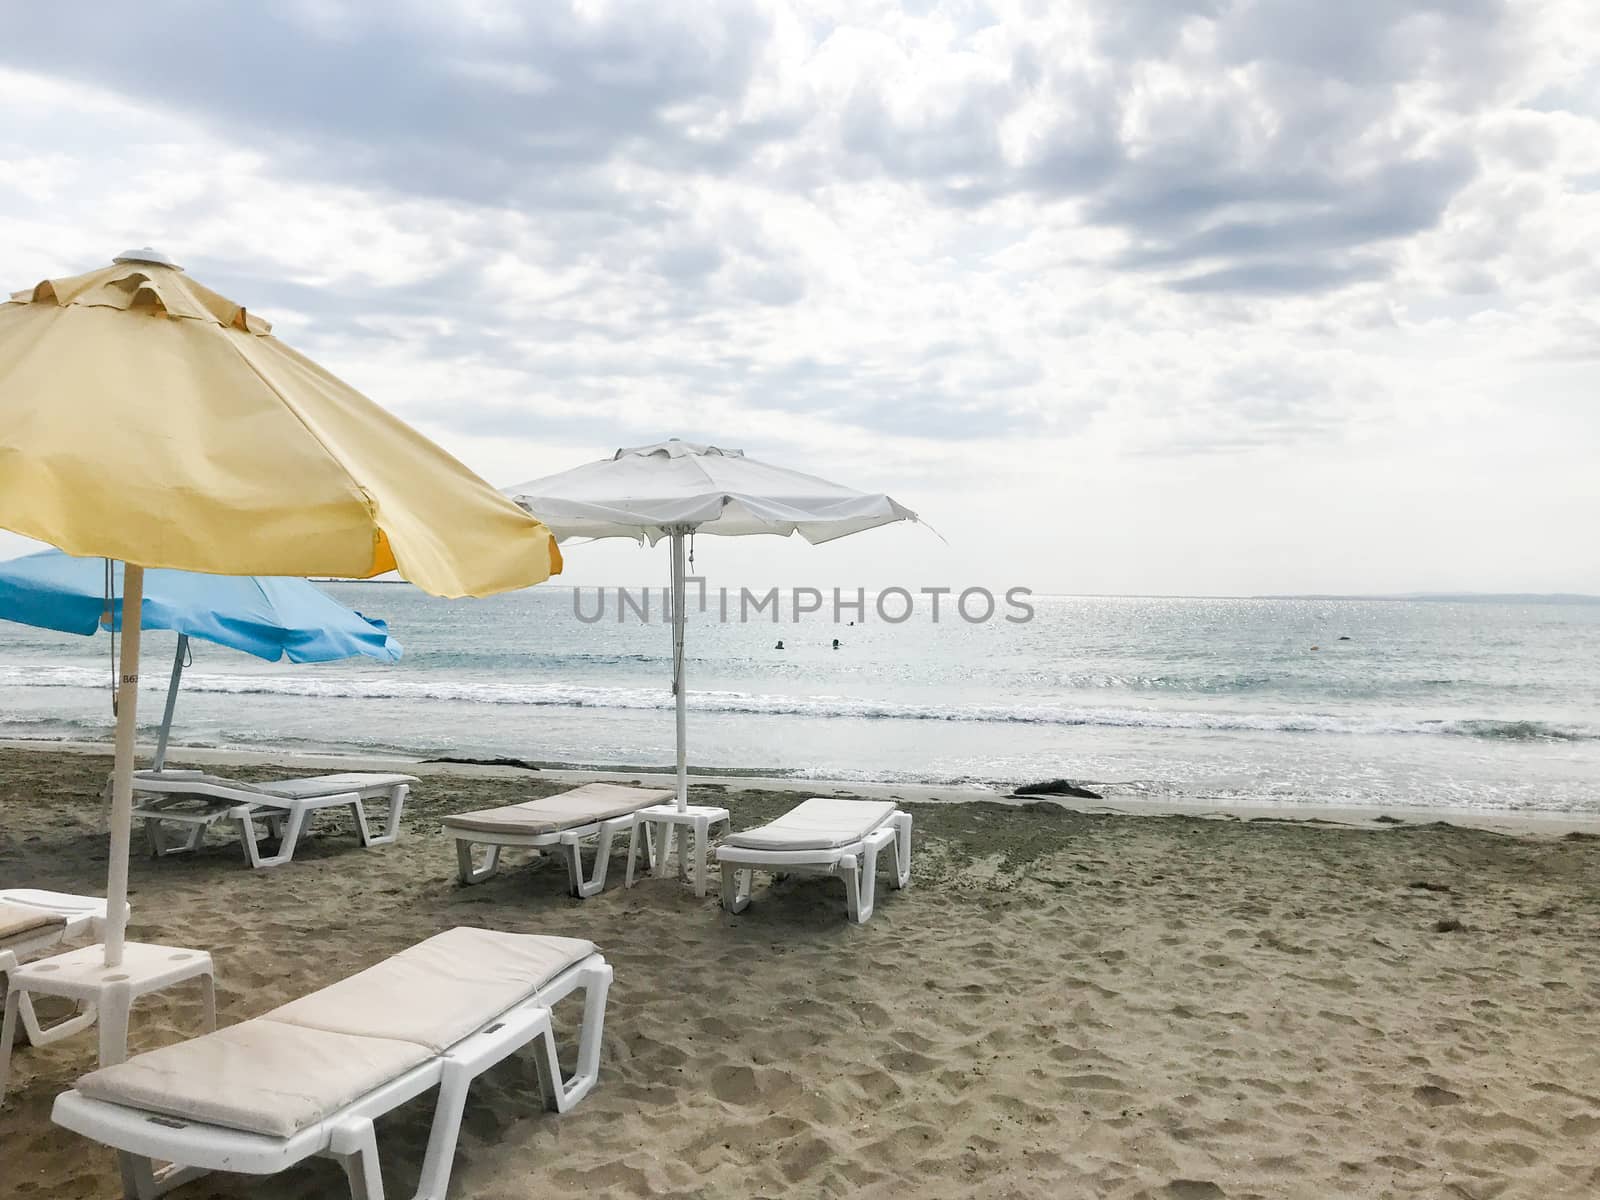 Pomorie, Bulgaria - September 12, 2019: People Relaxing On The Beach. by nenovbrothers